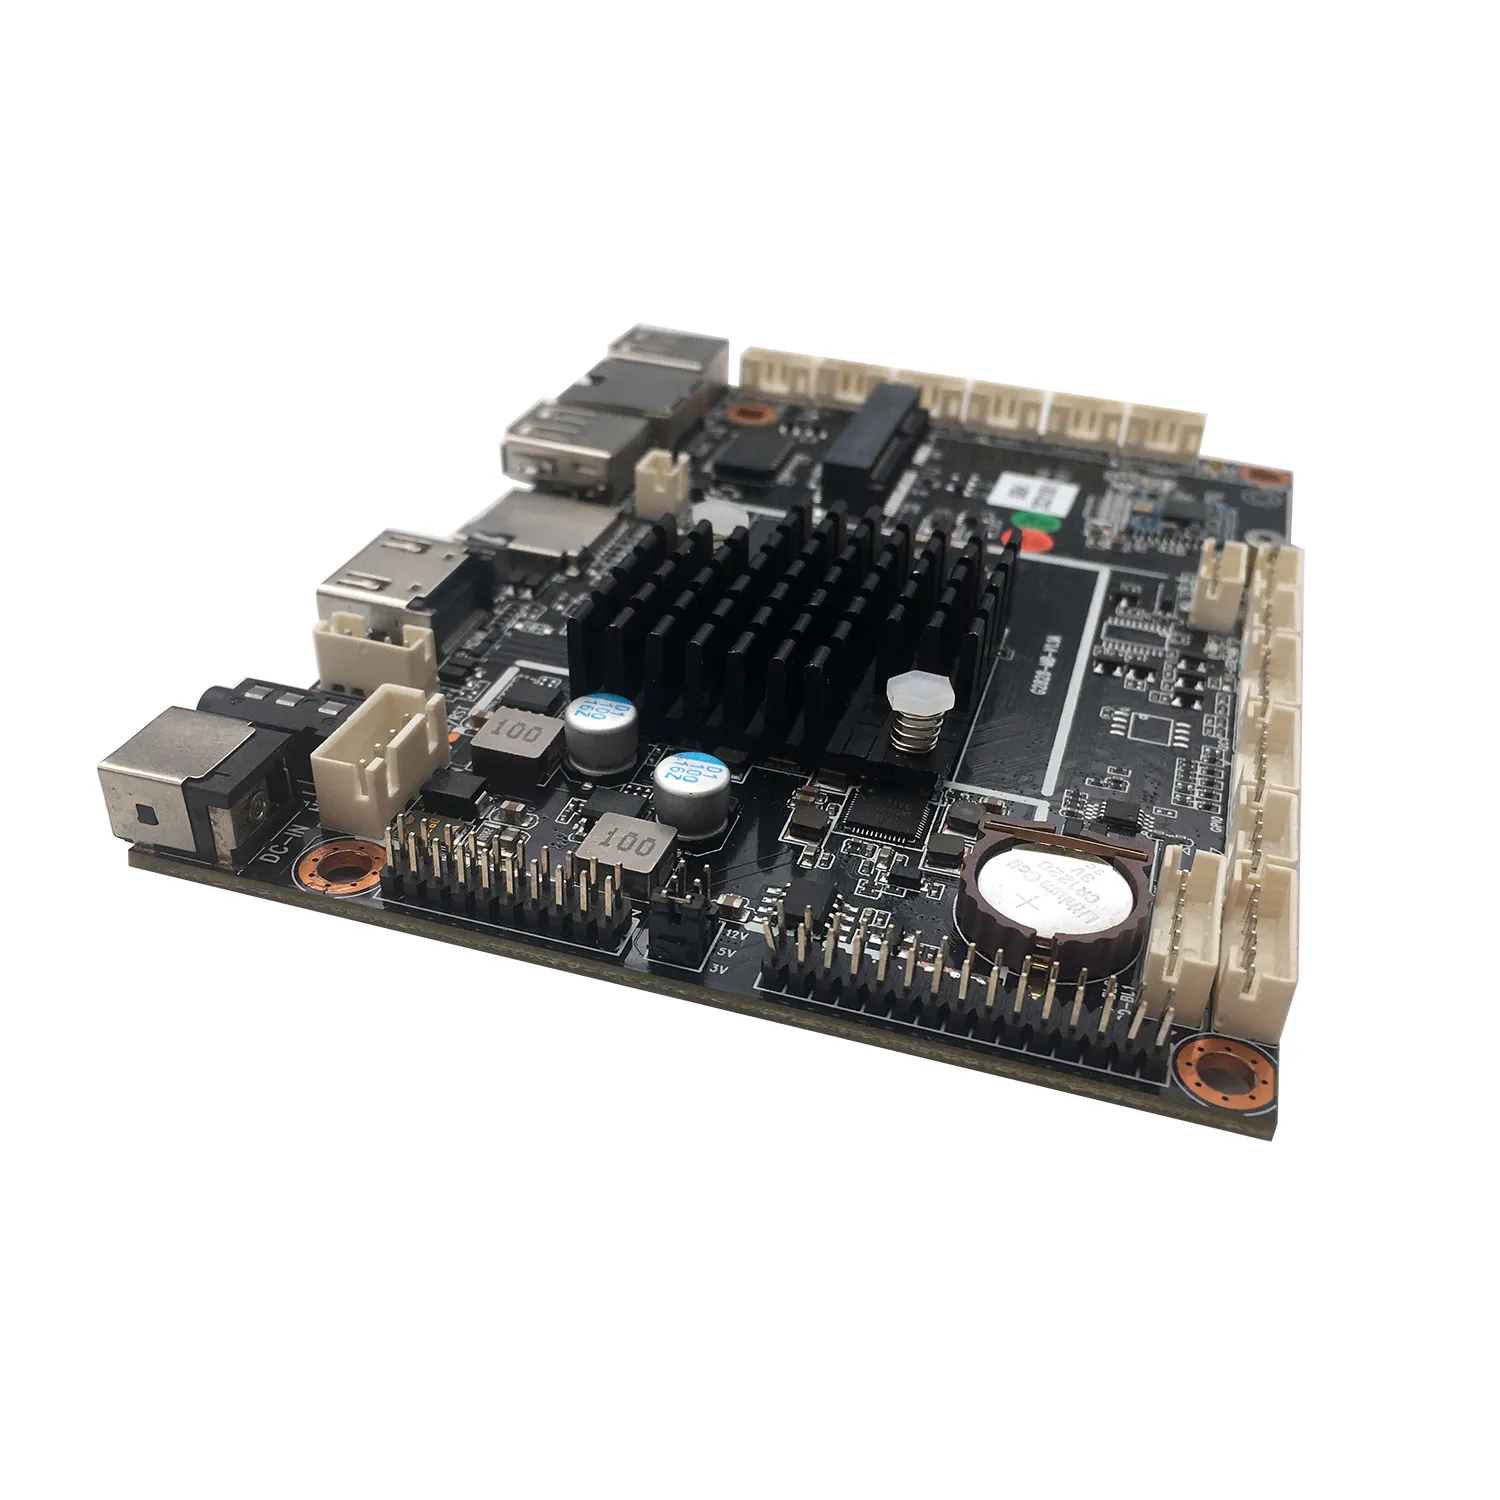 Rockchip RK3288 quad Core A17 IOT ARM embedded Industrial android linux board scheda madre rk3288